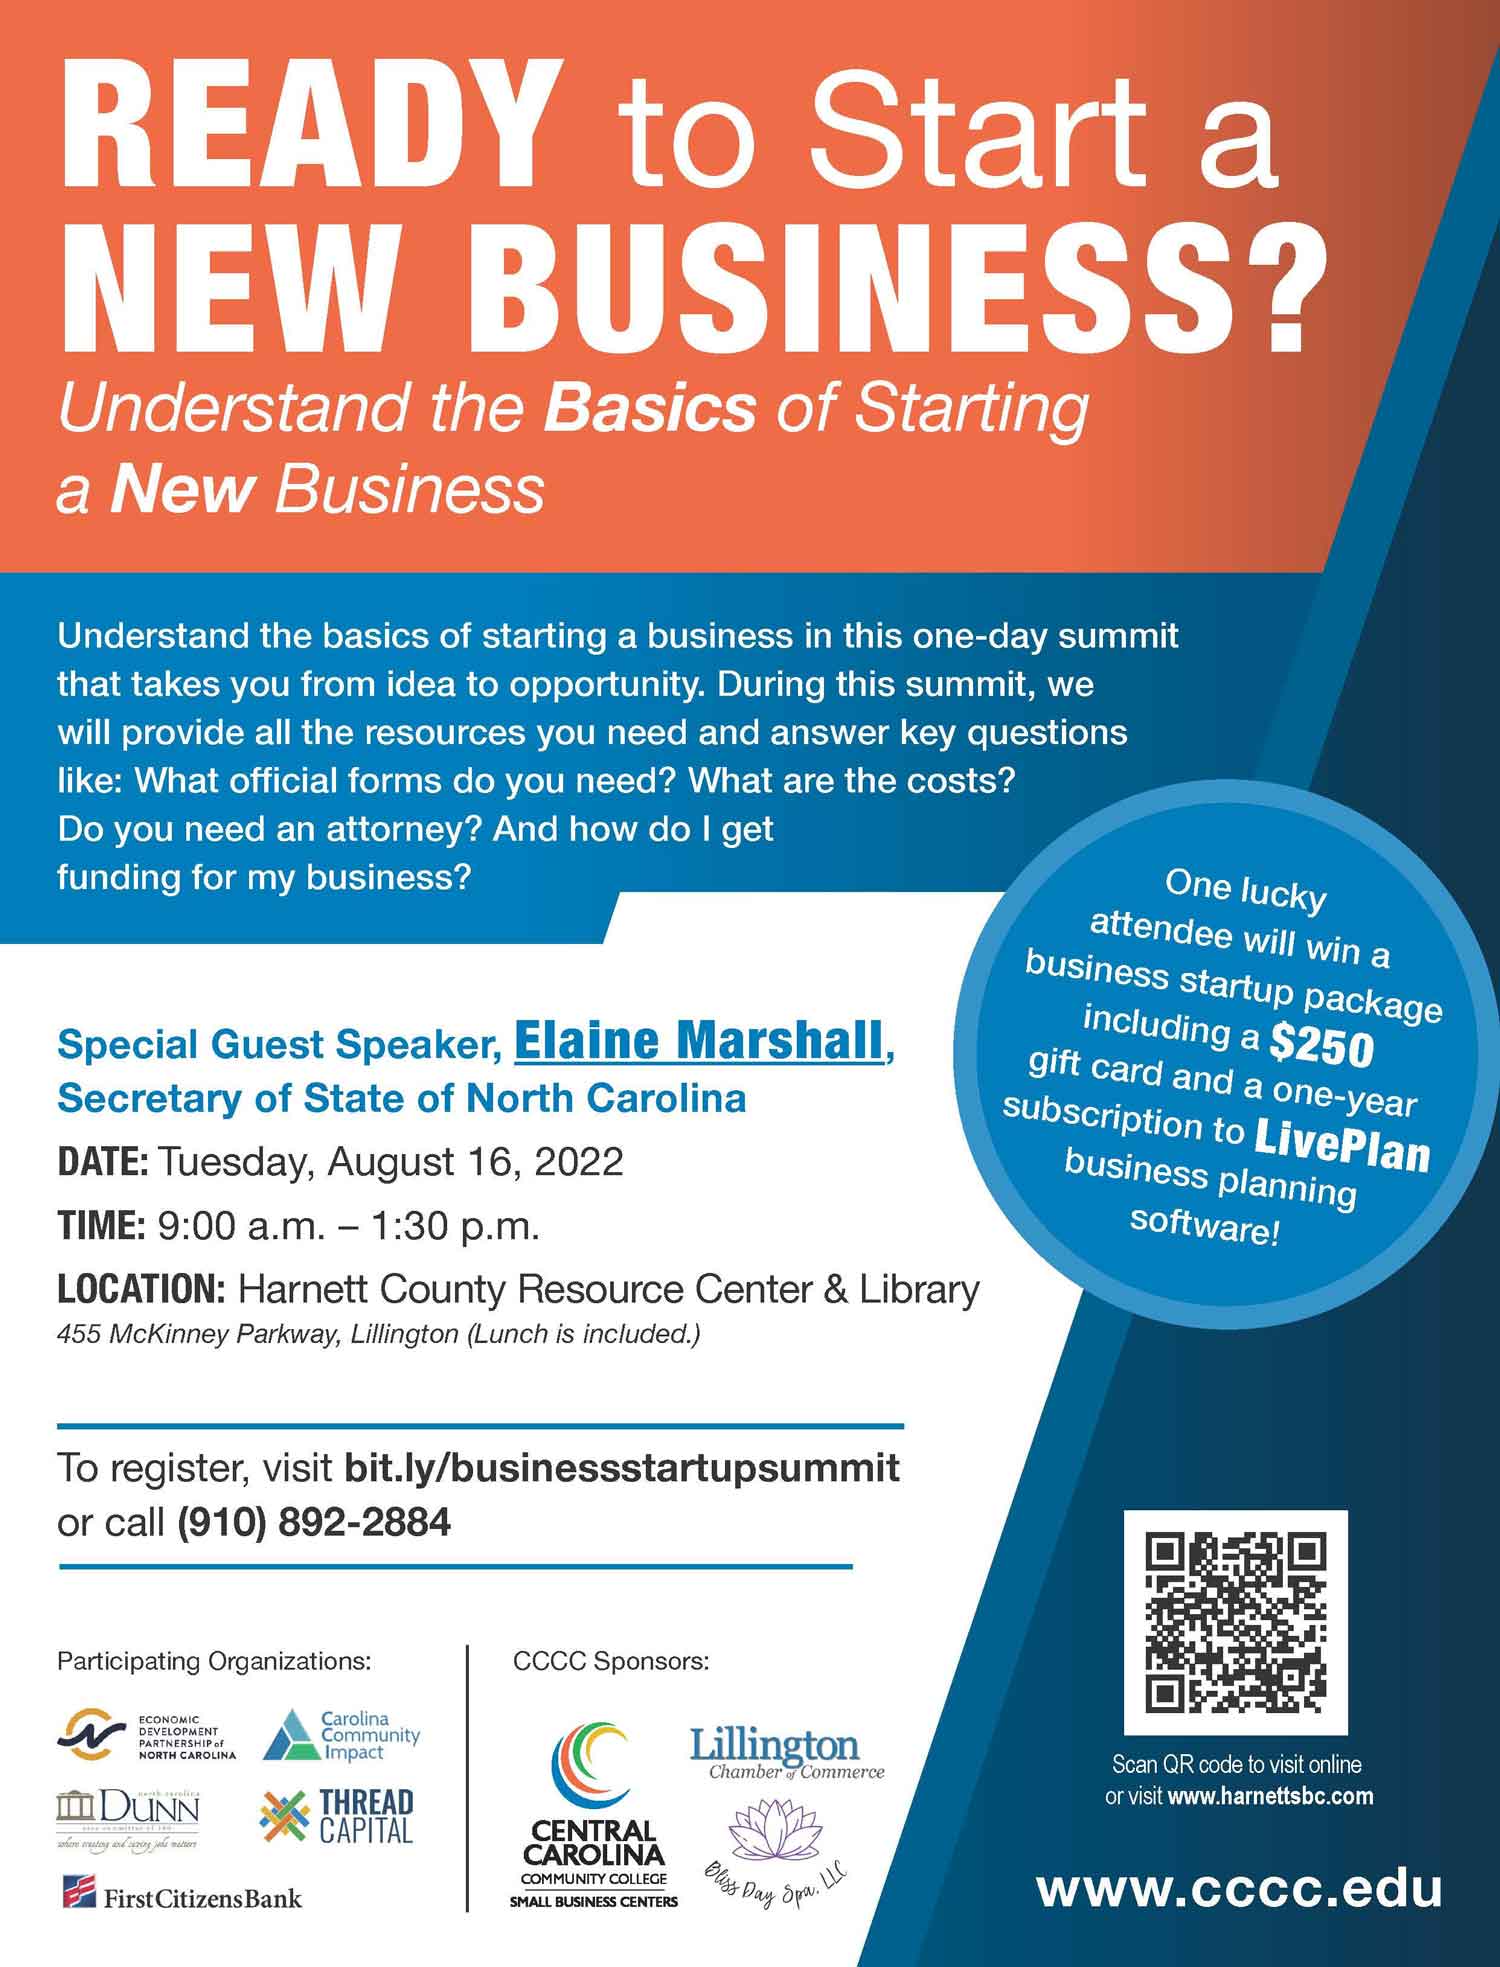 Business Startup Summit to take place on Aug. 16th in Lillington